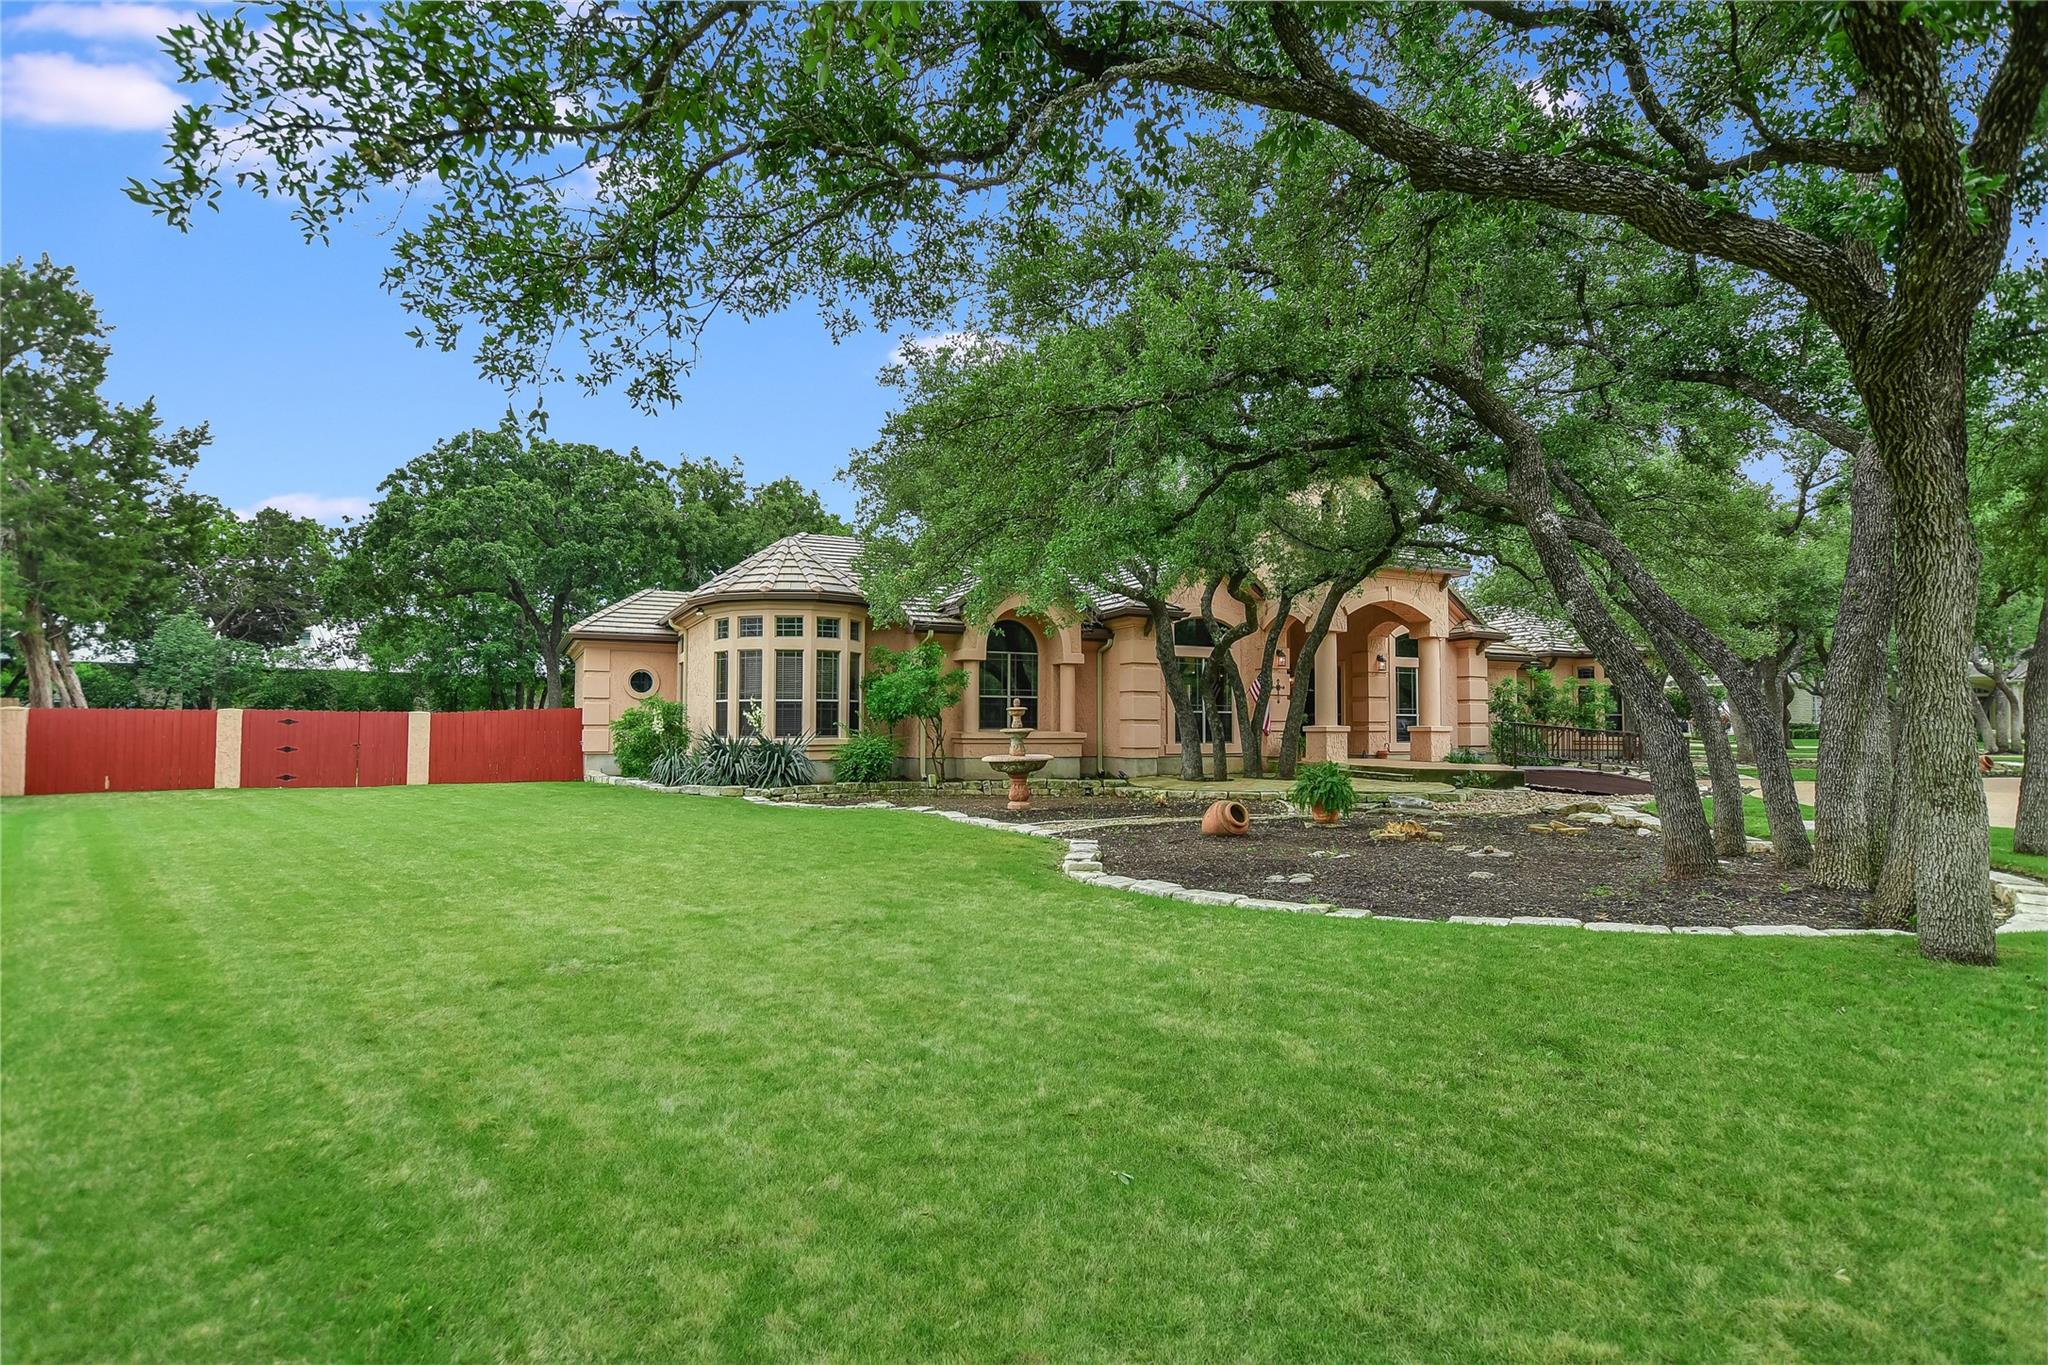 View Round Rock, TX 78681 house